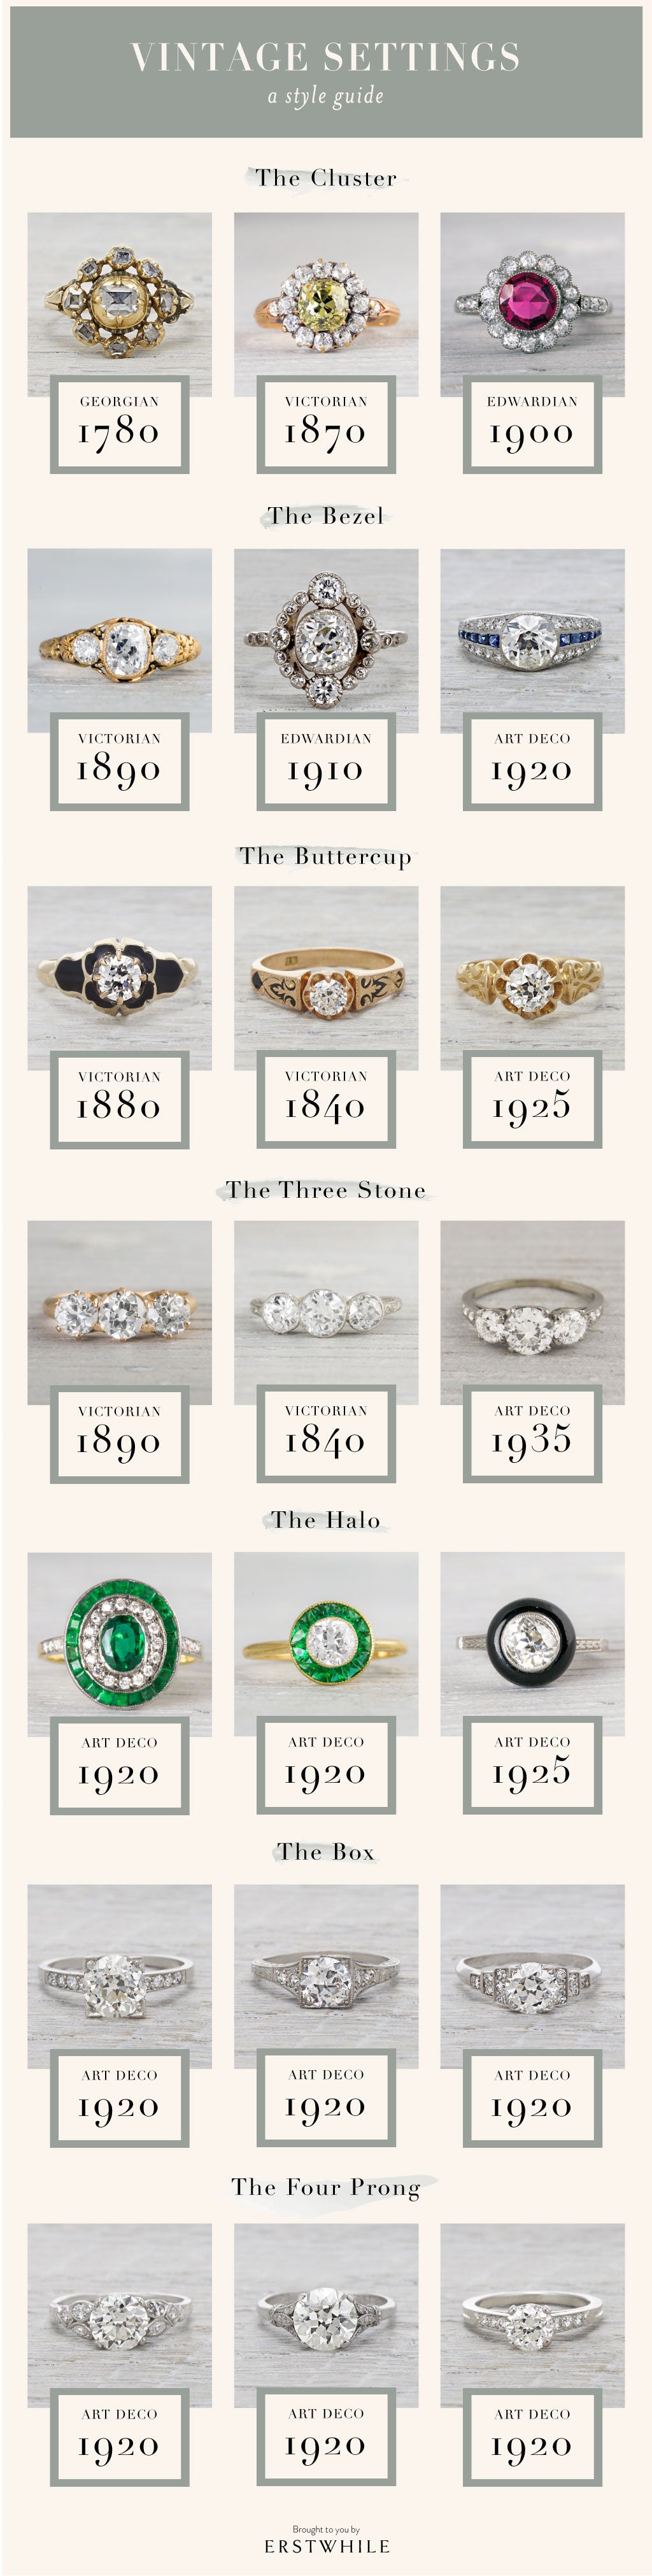 The anatomy of a ring | Technical Jewellery Terms | Taylor & Hart